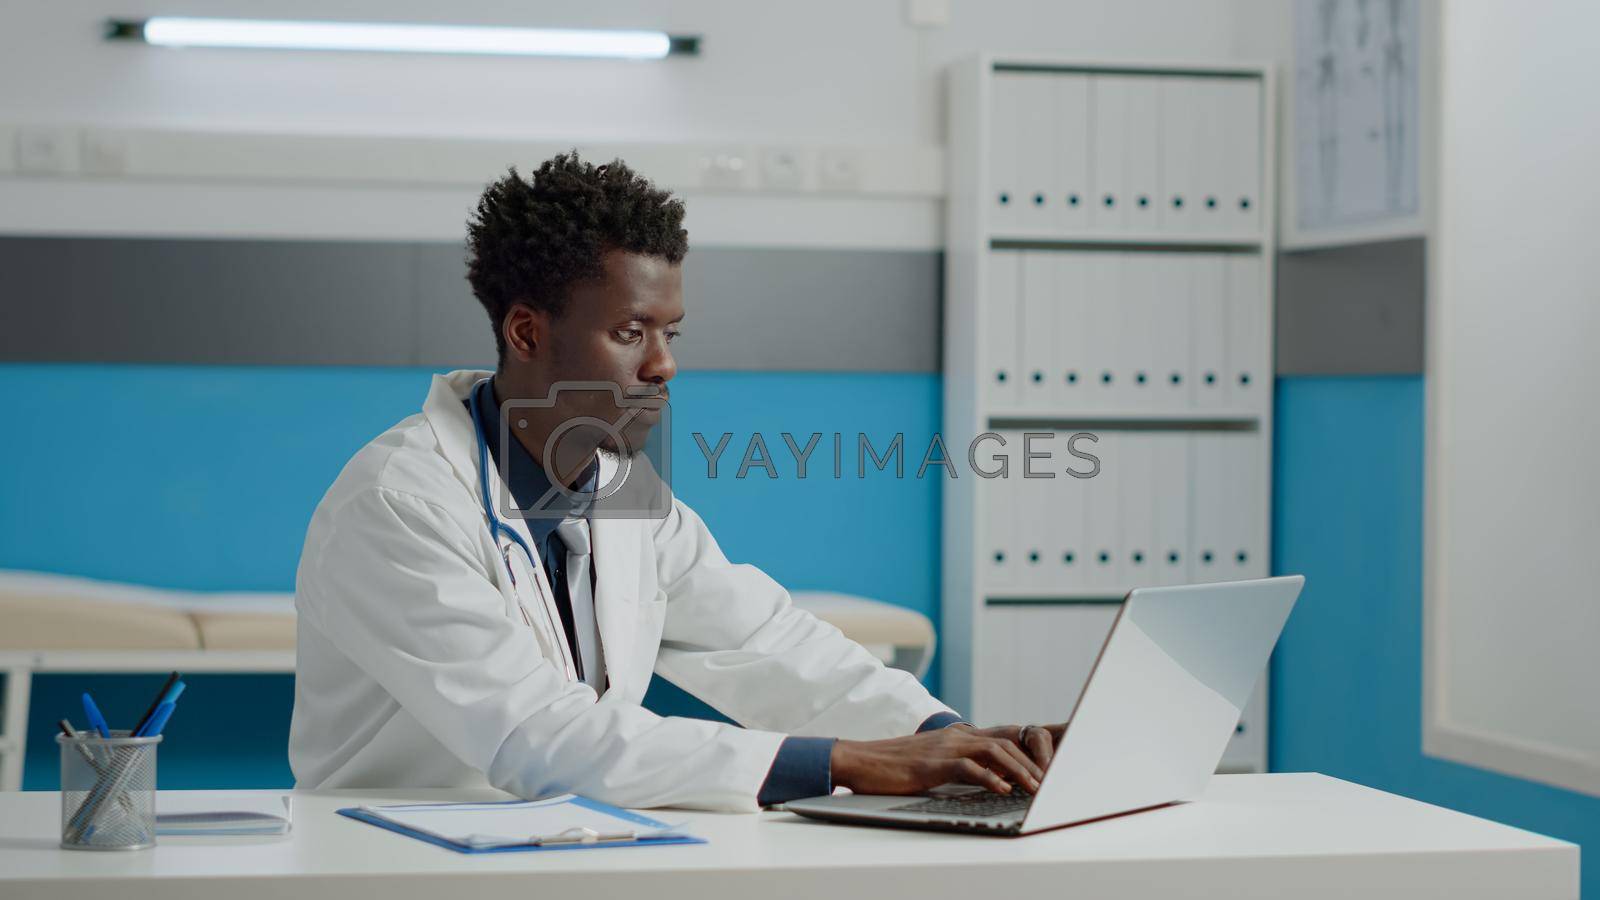 Portrait of healthcare specialist looking at camera while smiling in medical cabinet. Young medic with healthcare uniform typing on laptop keyboard and sitting at desk in doctors office